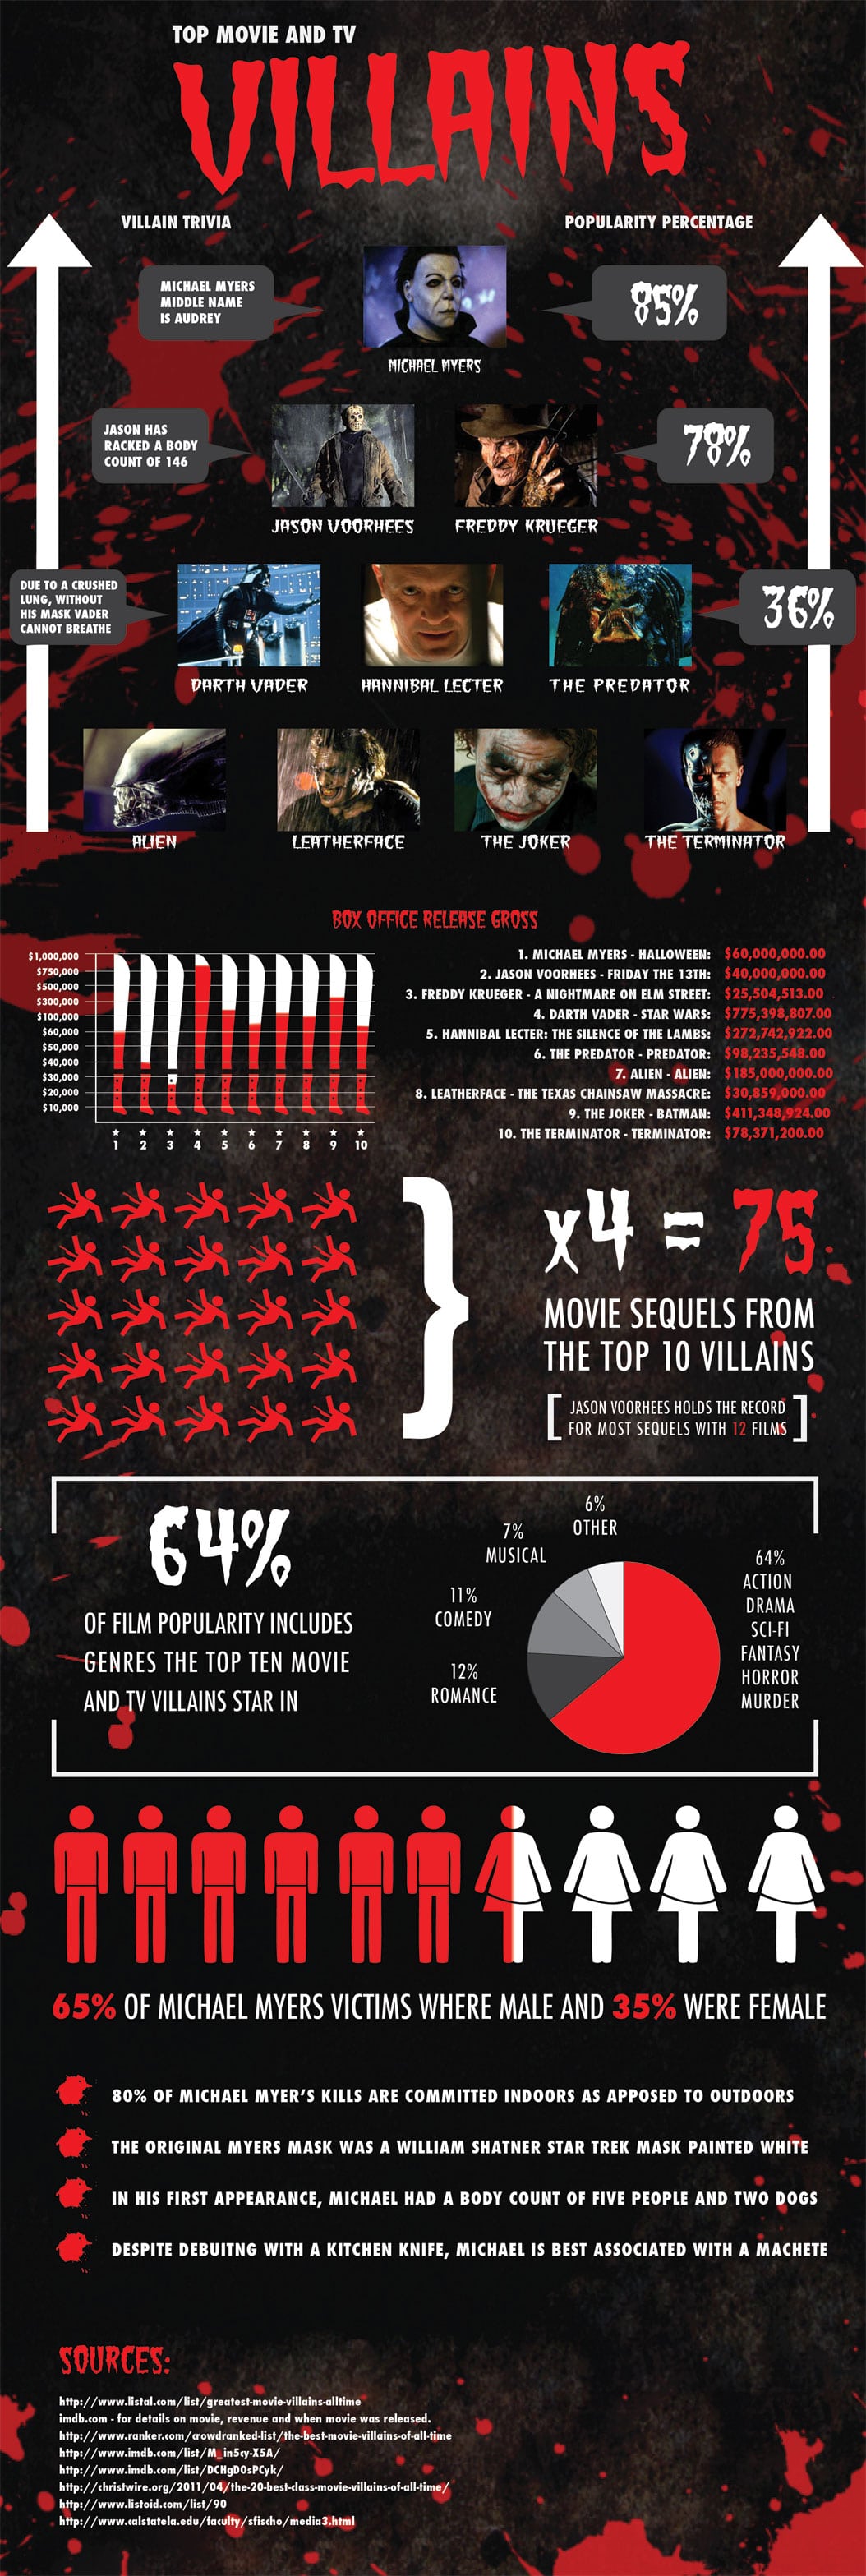 Top Movie & TV Villains: It’s All About Horror [Infographic]